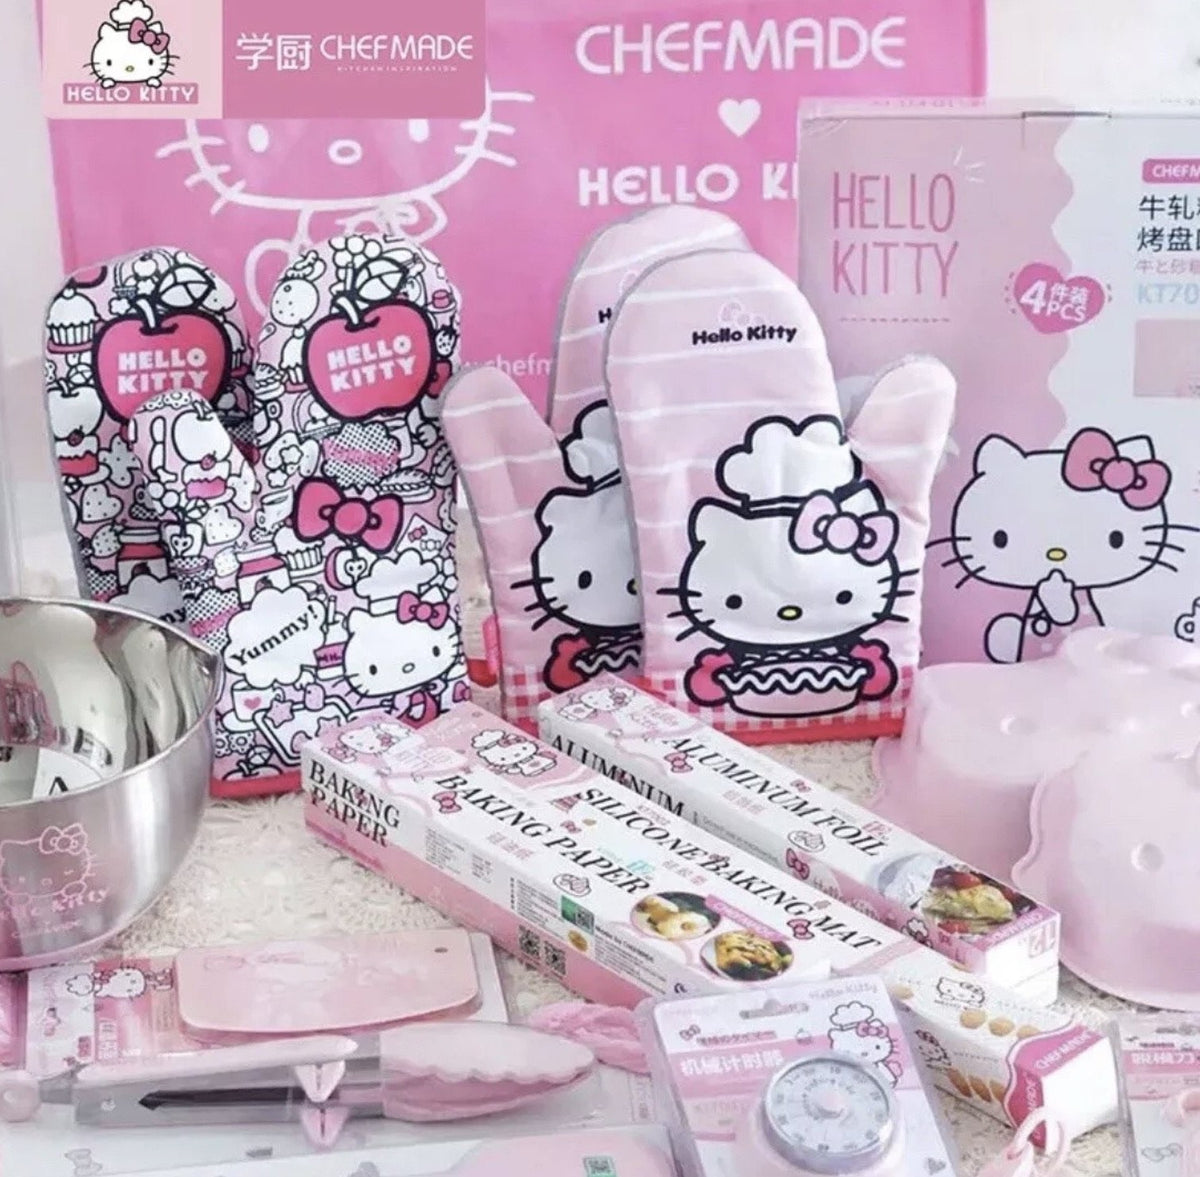 Out-of-print spot Sanrio authorized Pinkholic knife set-chef's